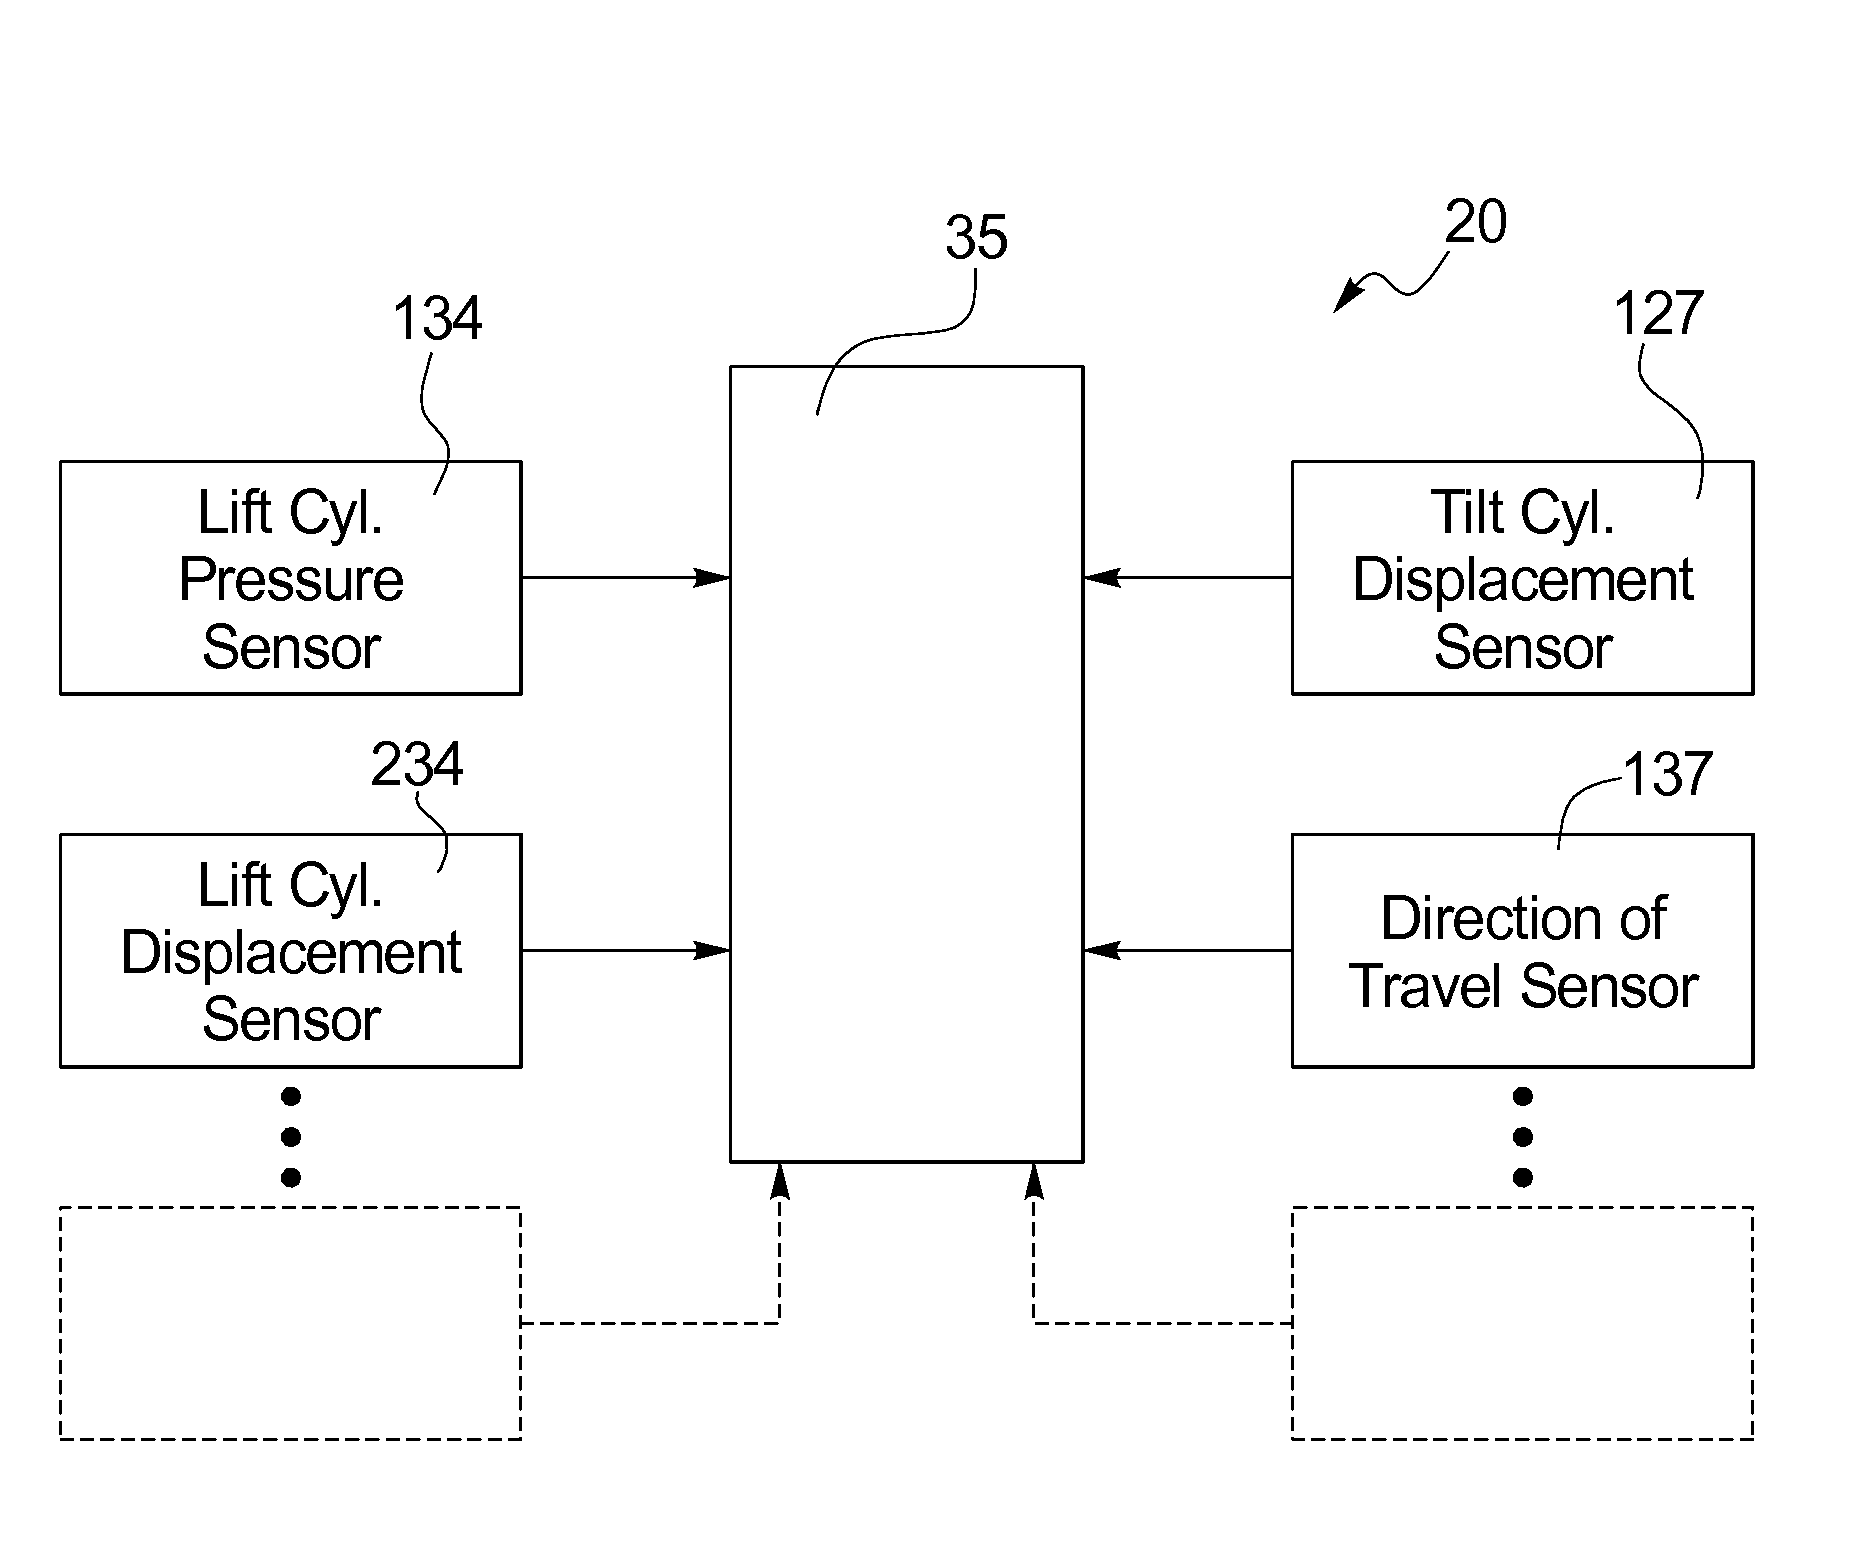 Equipment performance monitoring system and method